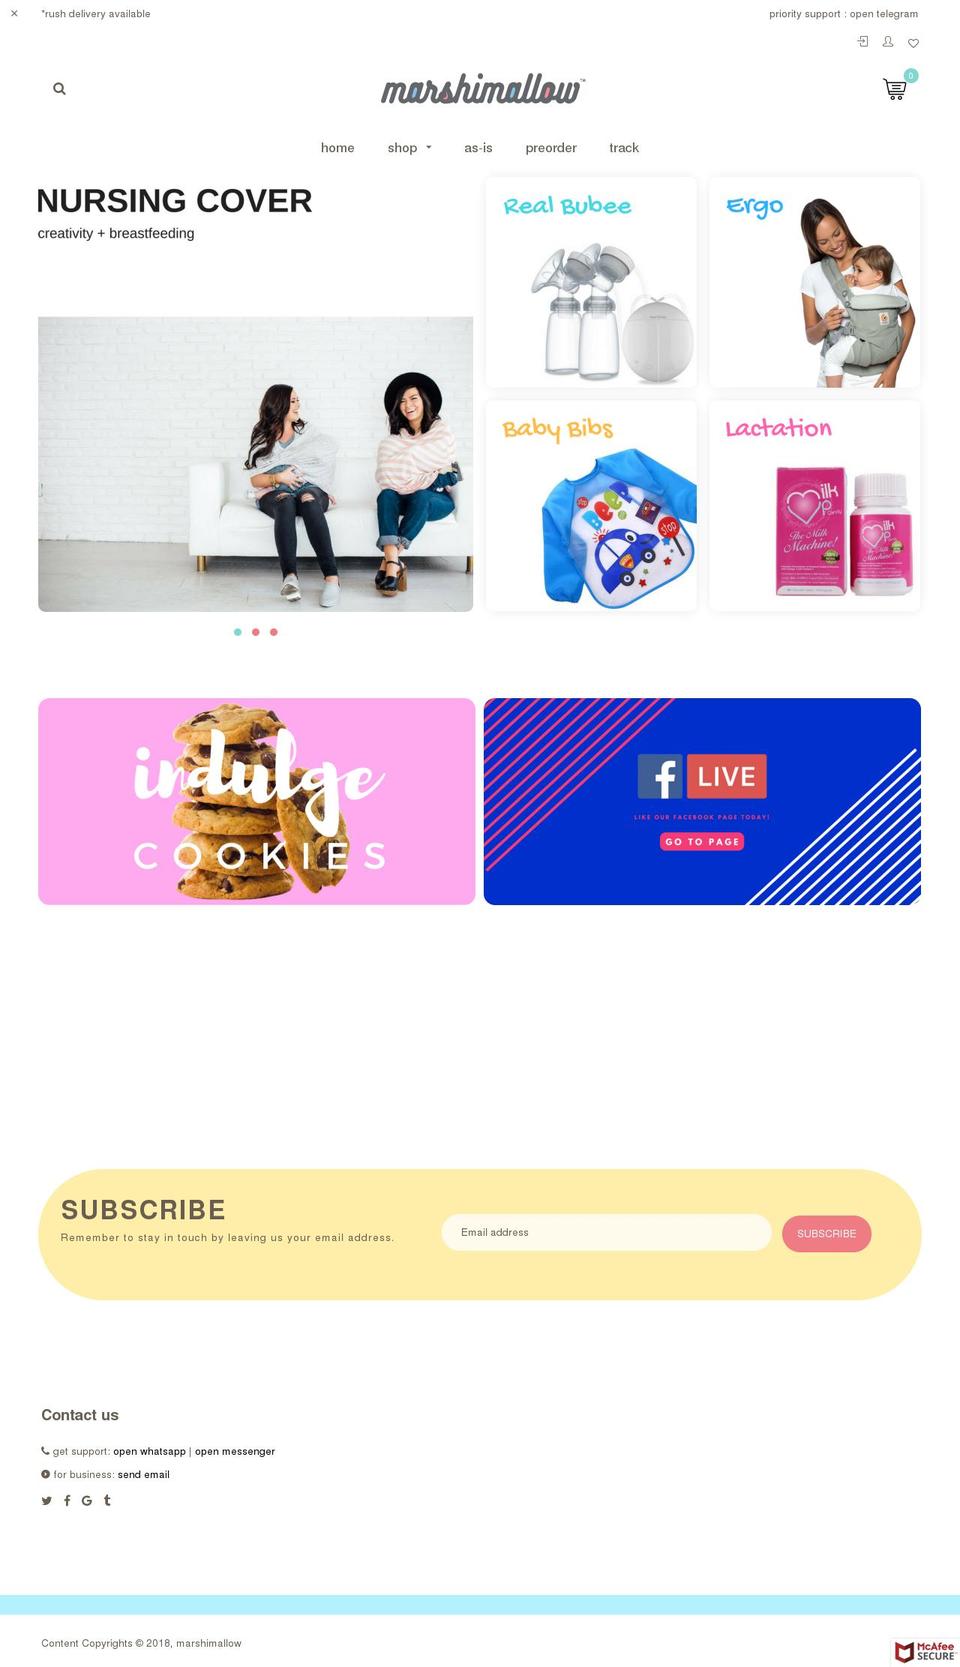 Express Shopify theme site example marshimallow.store